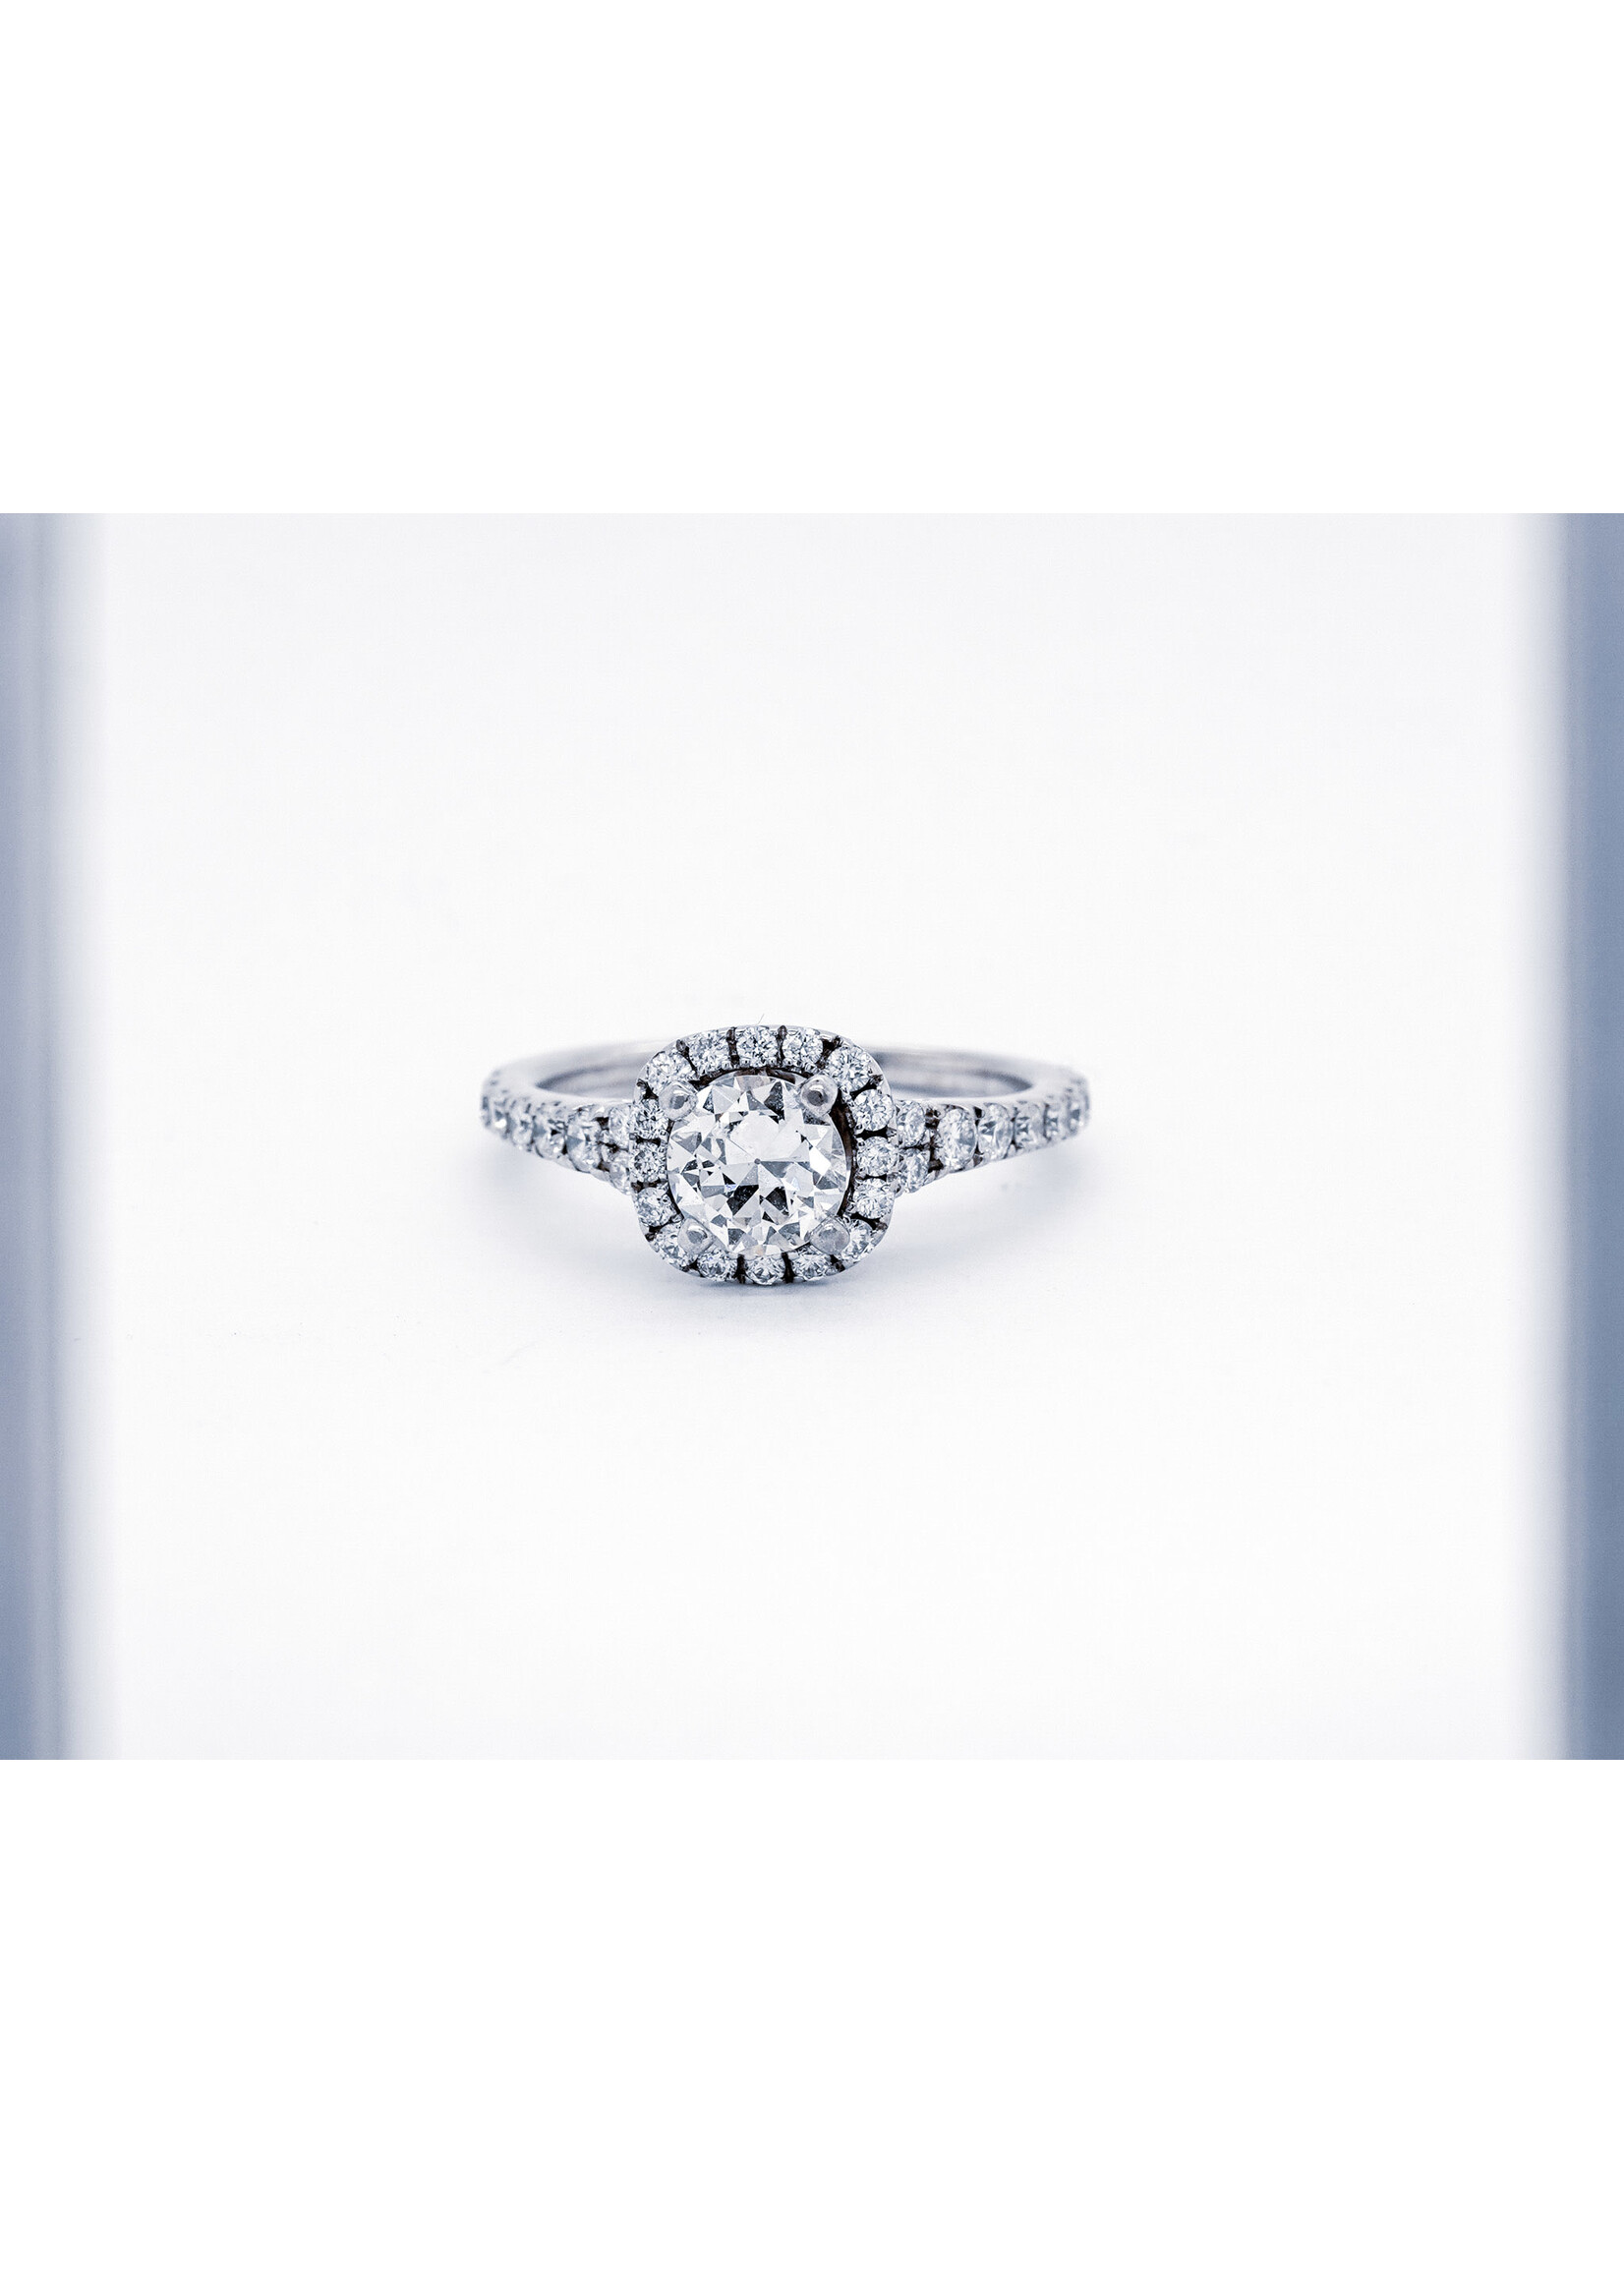 14KW 3.36g 1.28ctw (.78ctr) H/SI1 Old European Diamond Halo Engagement Ring (size 4.75)